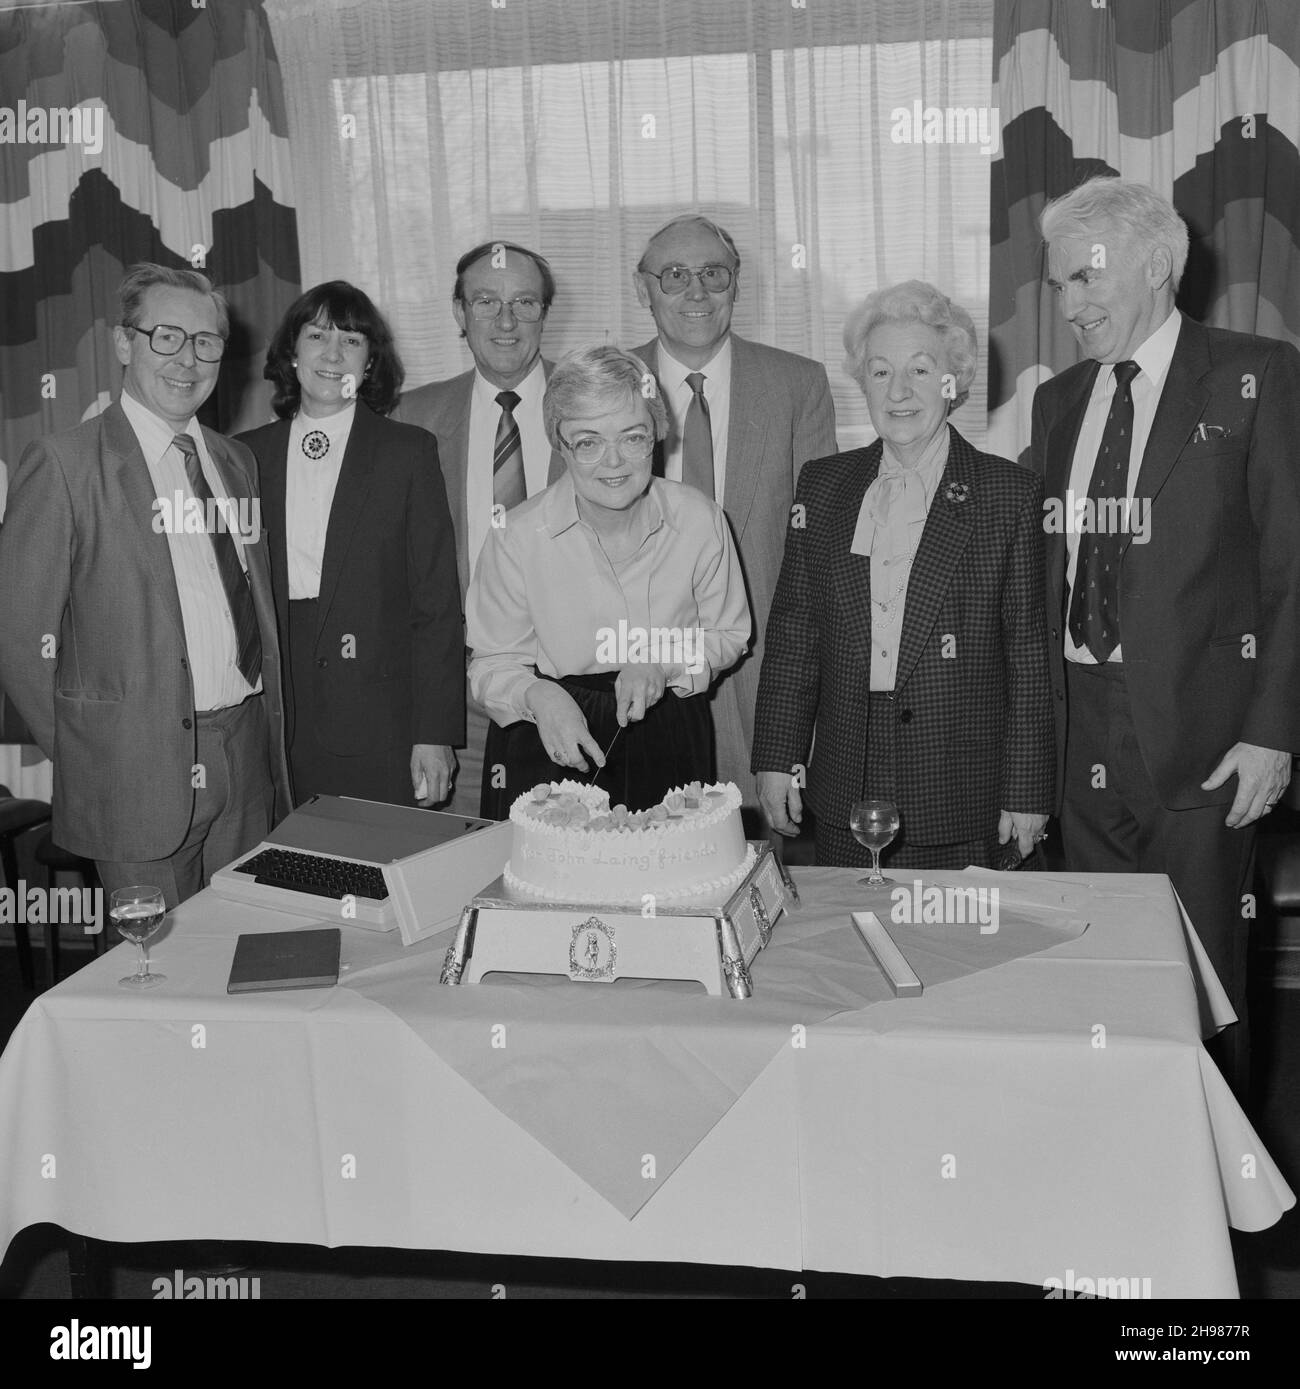 John Laing and Son Limited, Page Street, Mill Hill, Barnet, London, 30/03/1987. Mrs Joan Kirby, with a group of friends and colleagues, posed in the middle of cutting the cake during her retirement presentation at Mill Hill. Joan Kirby joined Laing in 1955 as a secretary for Mr Waldrum, who was in charge of personnel. She went on to work for various other individuals including John Renshaw. Joan joined Laing's Welfare Department in 1982 and retired from the Company in 1987, after 32 years of service. The typewriter beside the cake in this image was presented to Joan as a retirement gift. Stock Photo